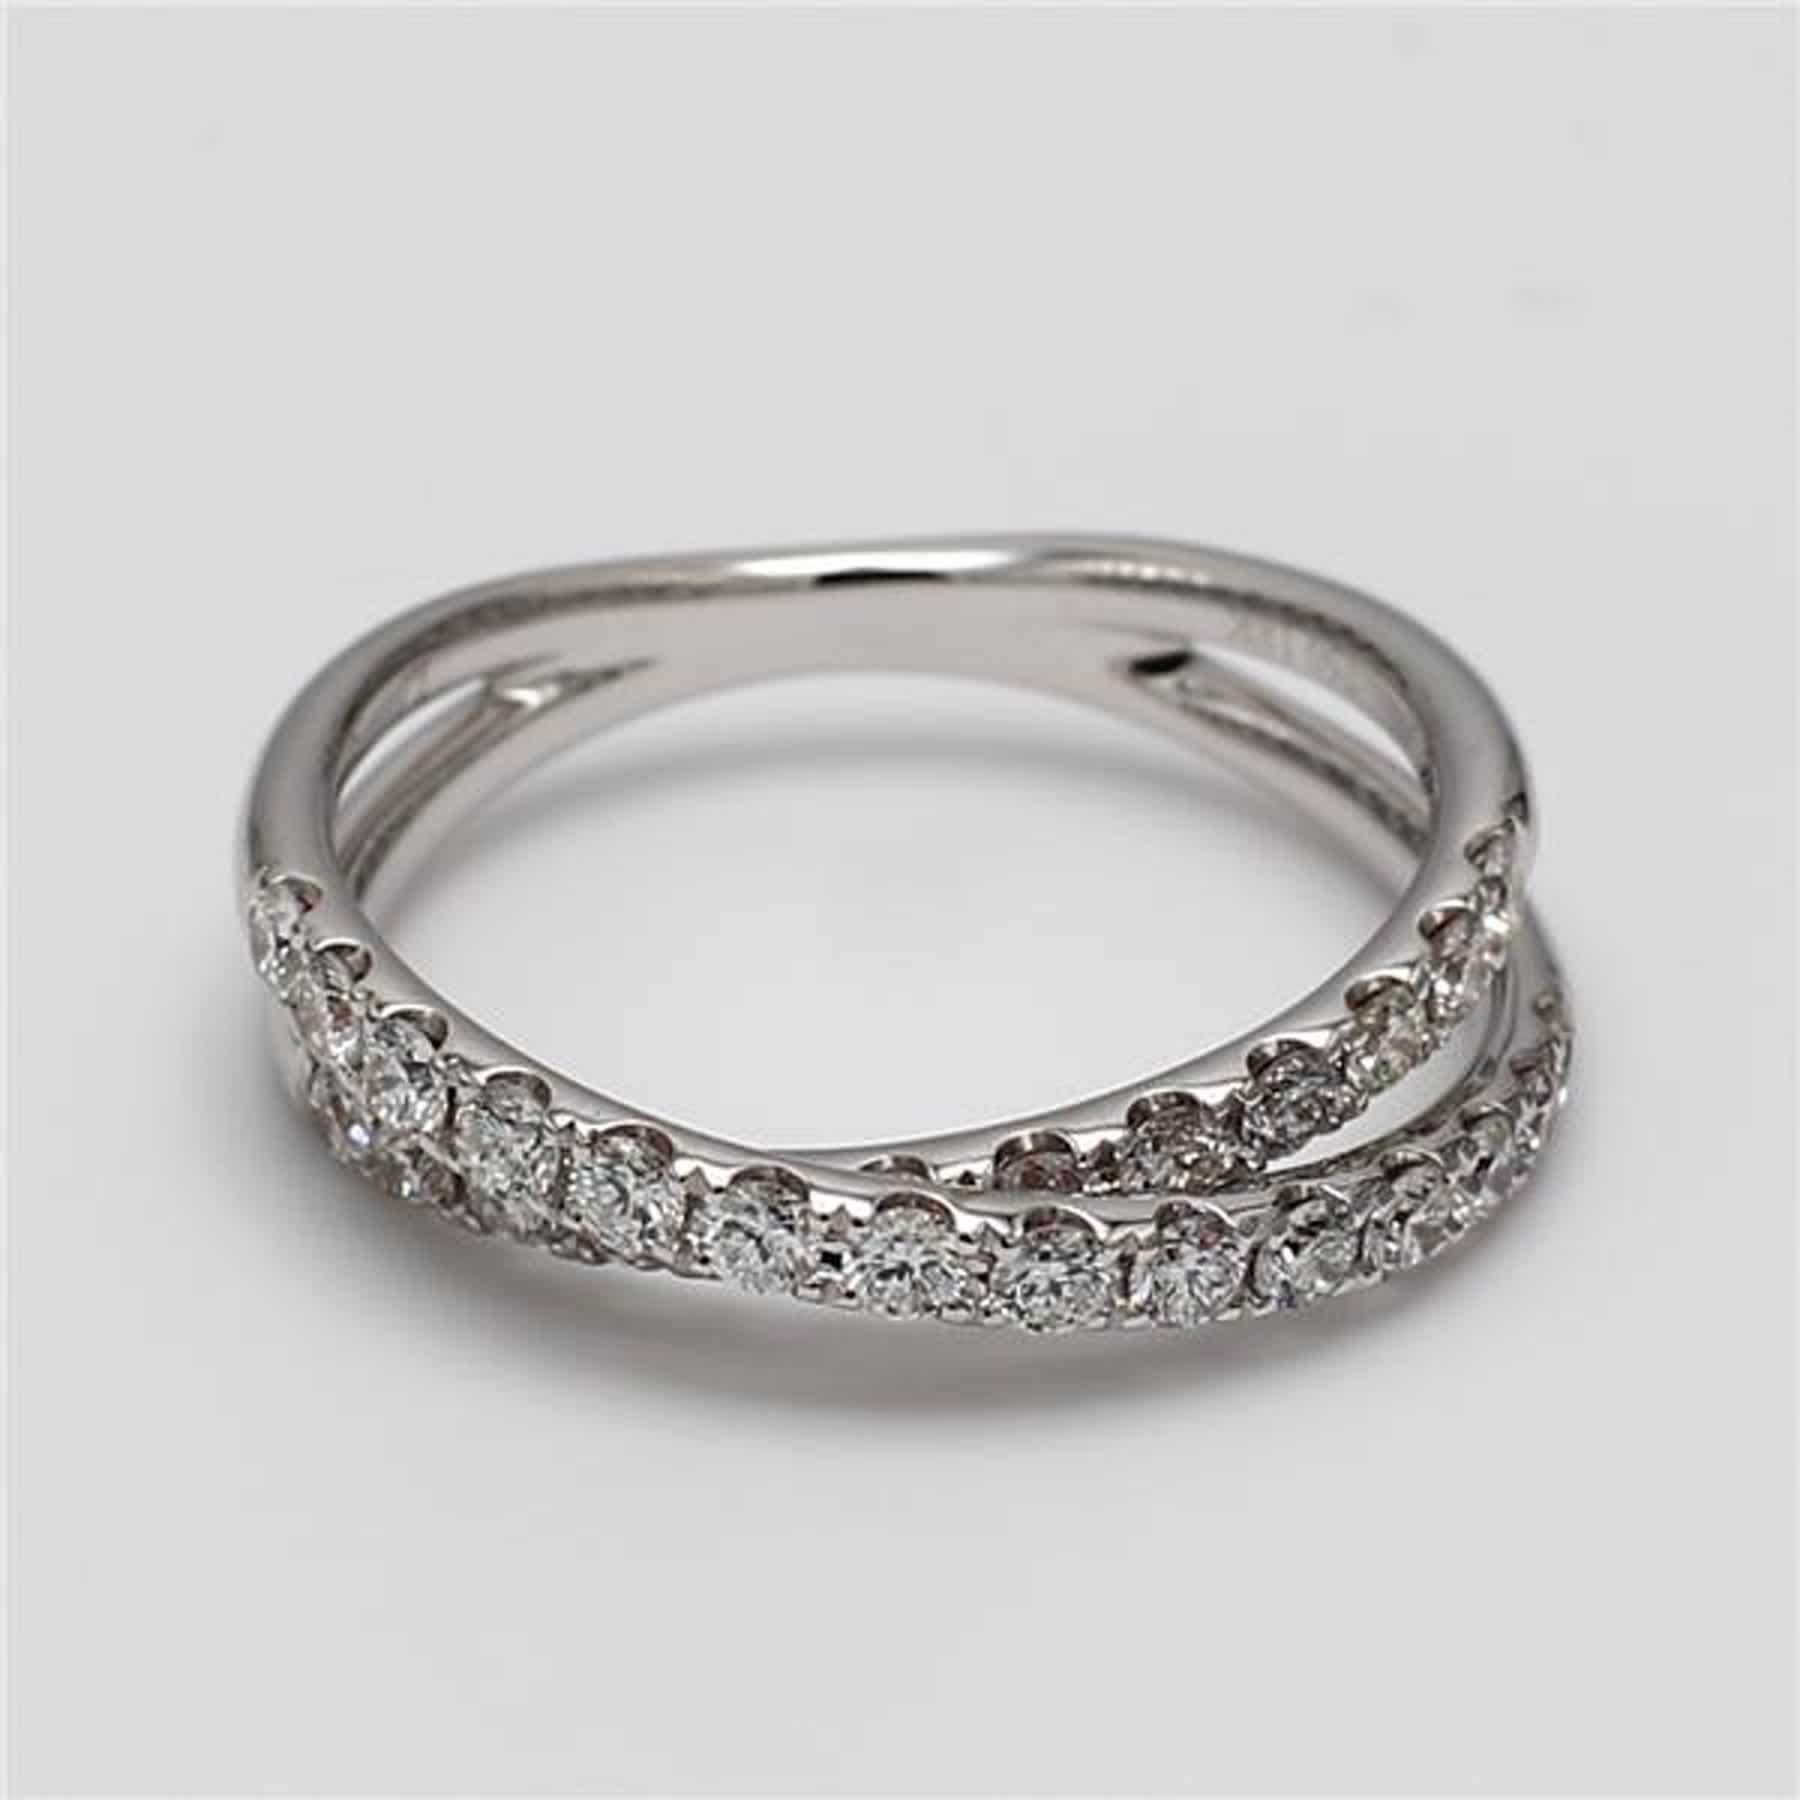 RareGemWorld's classic diamond band. Mounted in a beautiful 18K White Gold setting with natural round white diamond melee. This band is guaranteed to impress and enhance your personal collection!

Total Weight: .69cts

Length: 21.2 mm

Shank